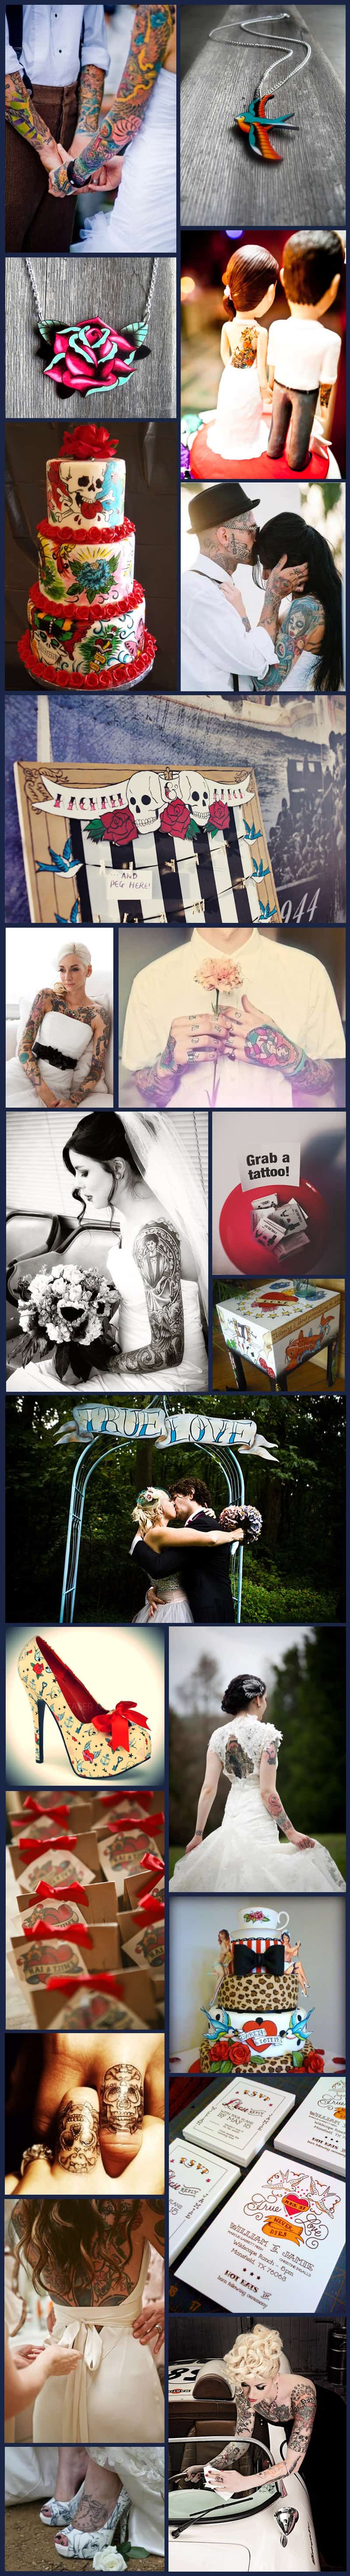 Tattoo and Ink inspiration board